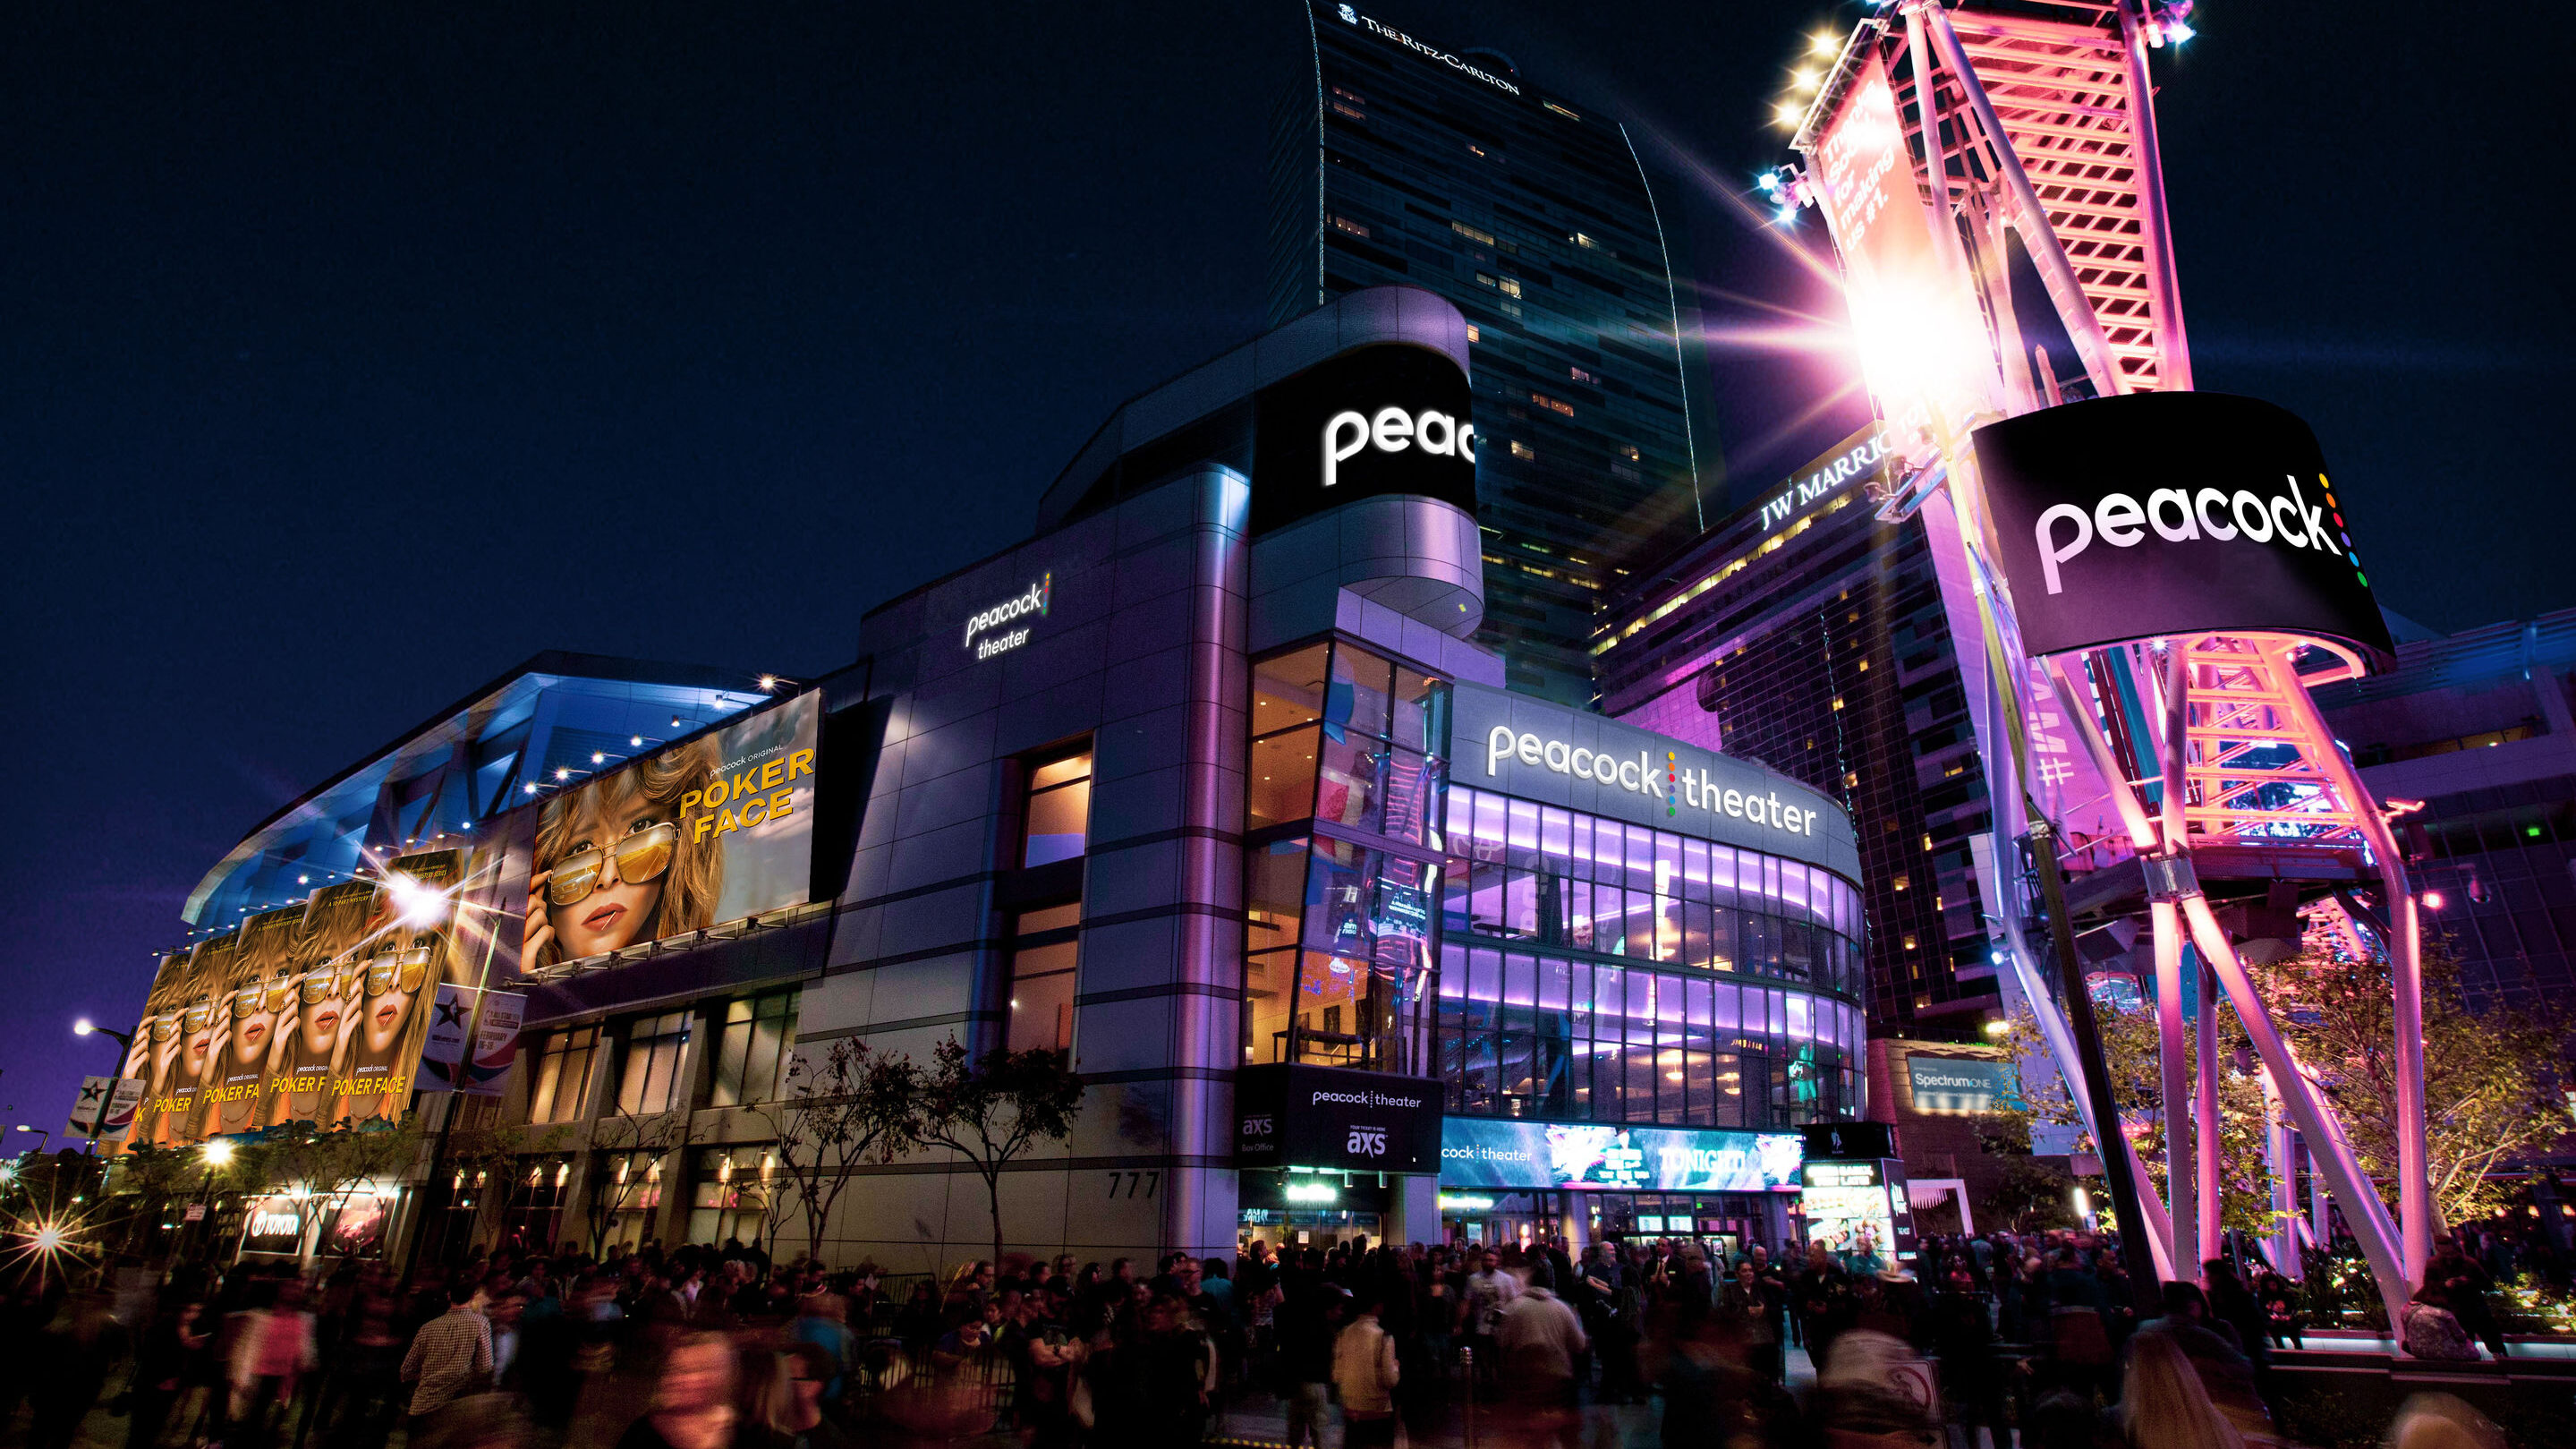 AEG strikes multi-year naming rights deal with Peacock streaming service for L.A. Live’s Microsoft Theater – Music Business Worldwide